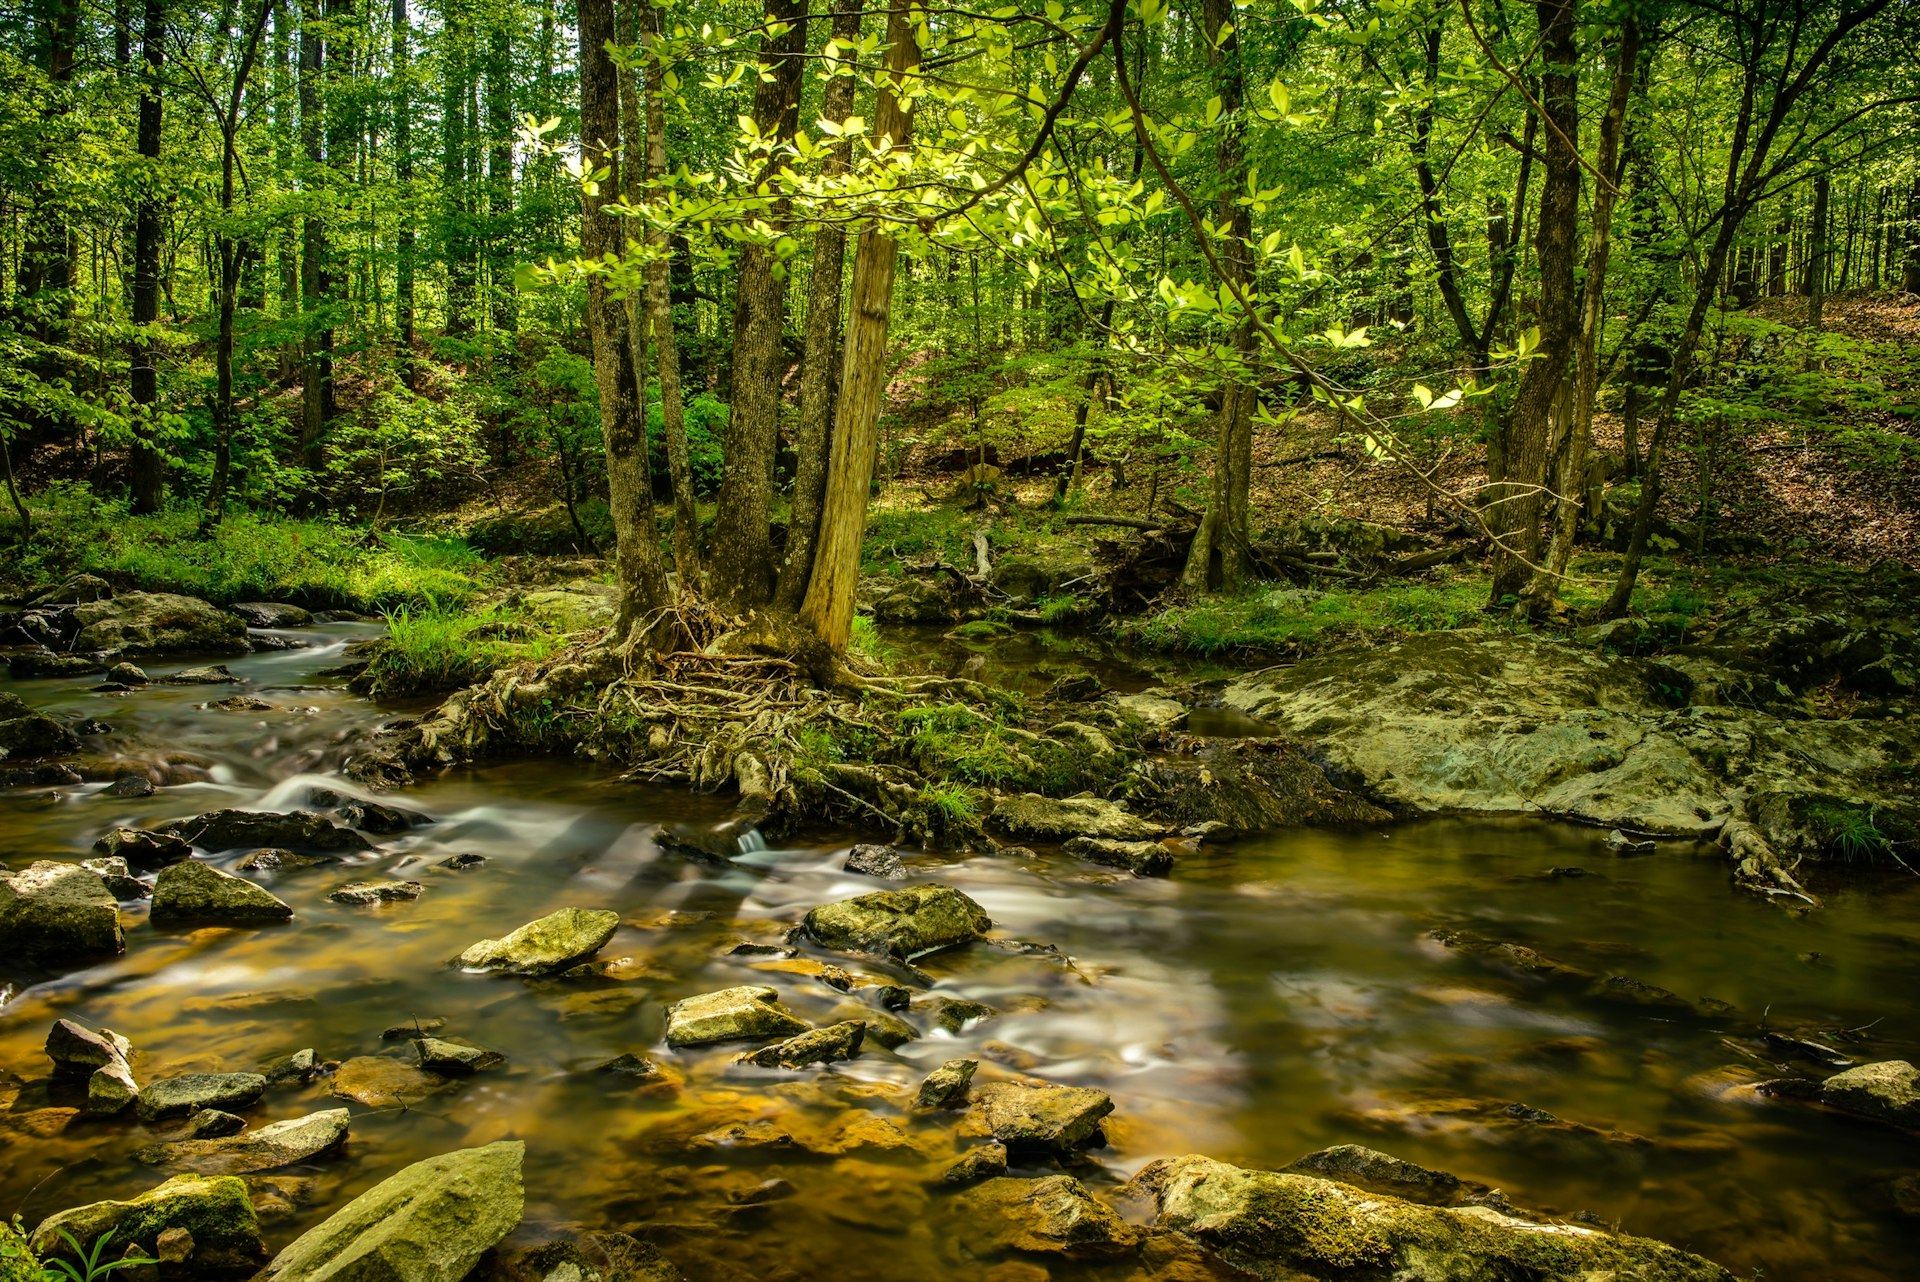 A small stream flows over rocks in the middle of the forested Eno River State Park in Durham, NC